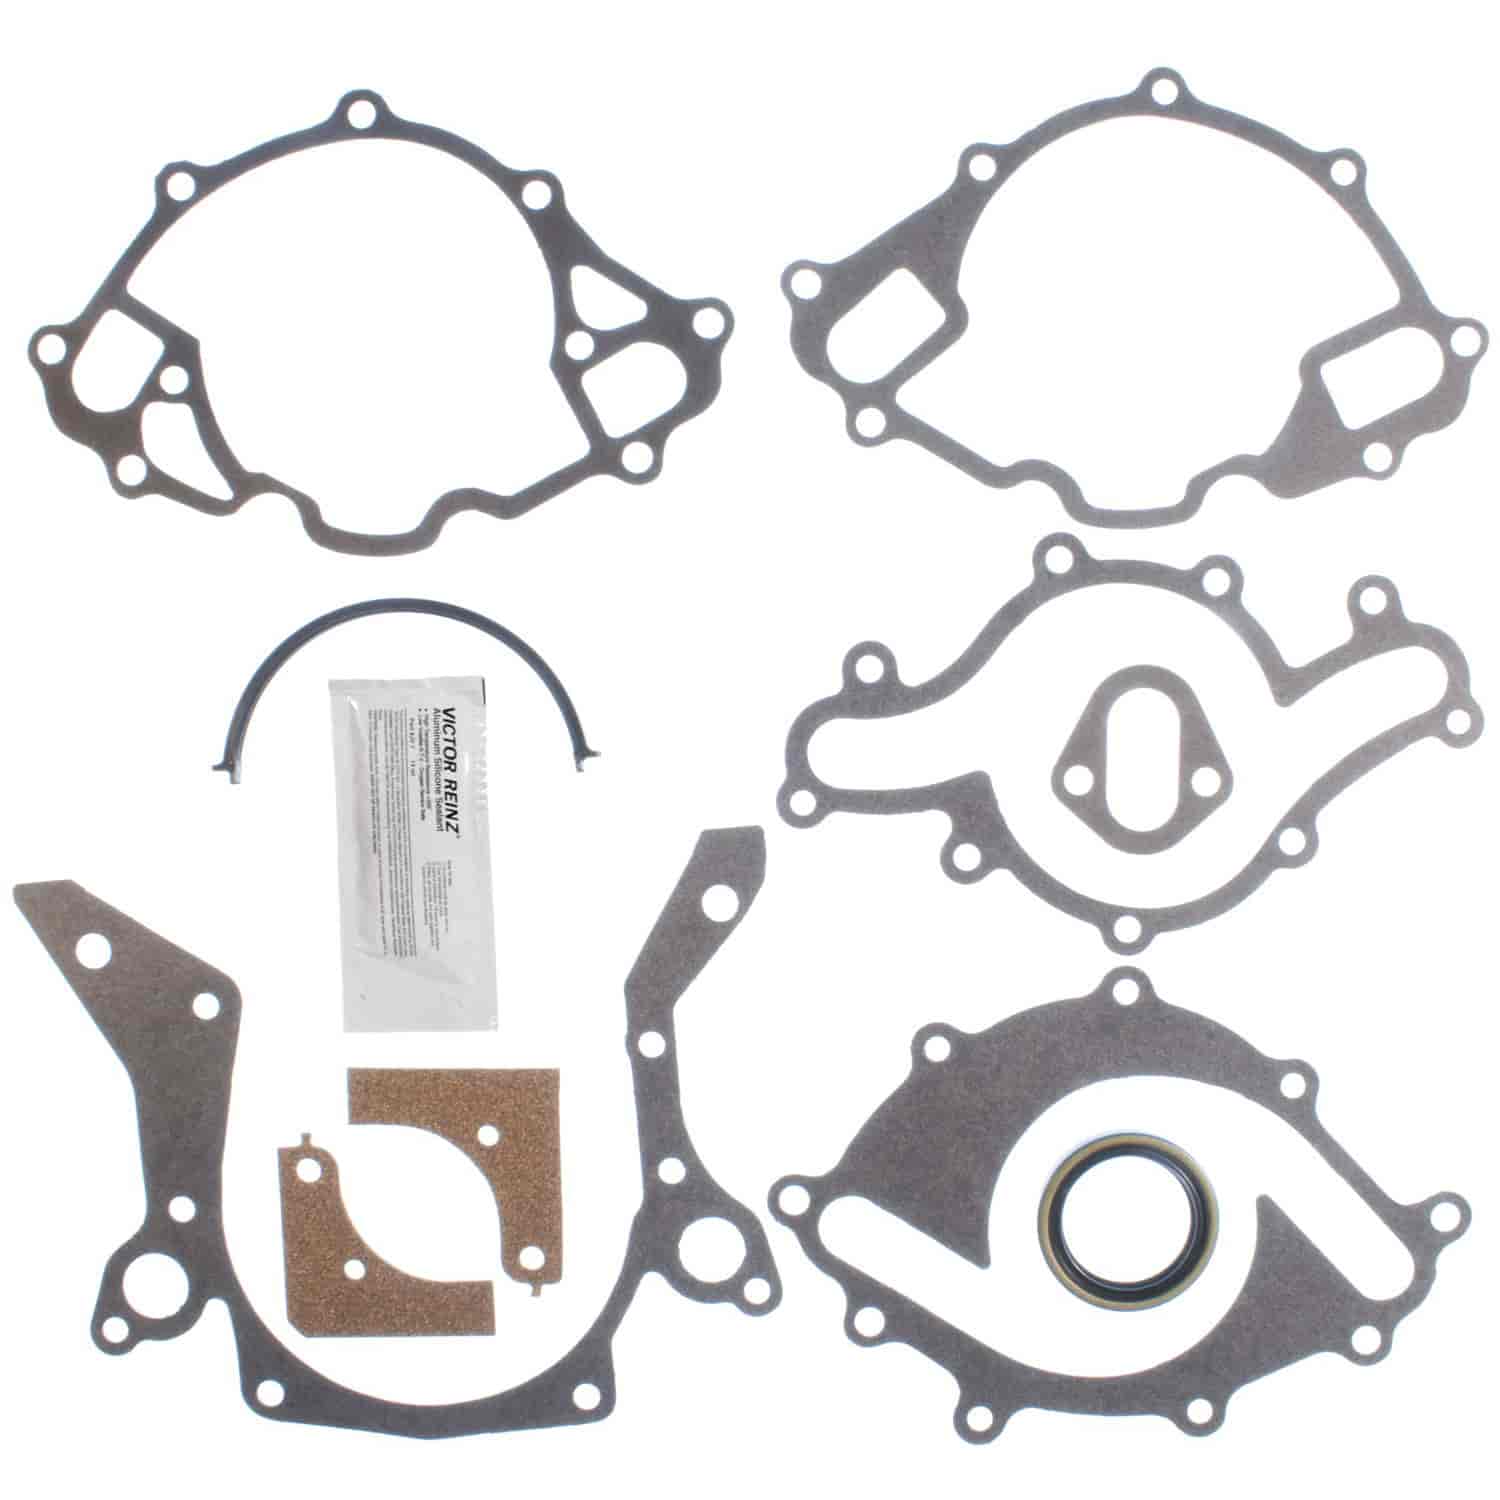 Timing Cover Gasket Set 1986-2001 Small Block Ford 302/351W (5.0/5.8L)